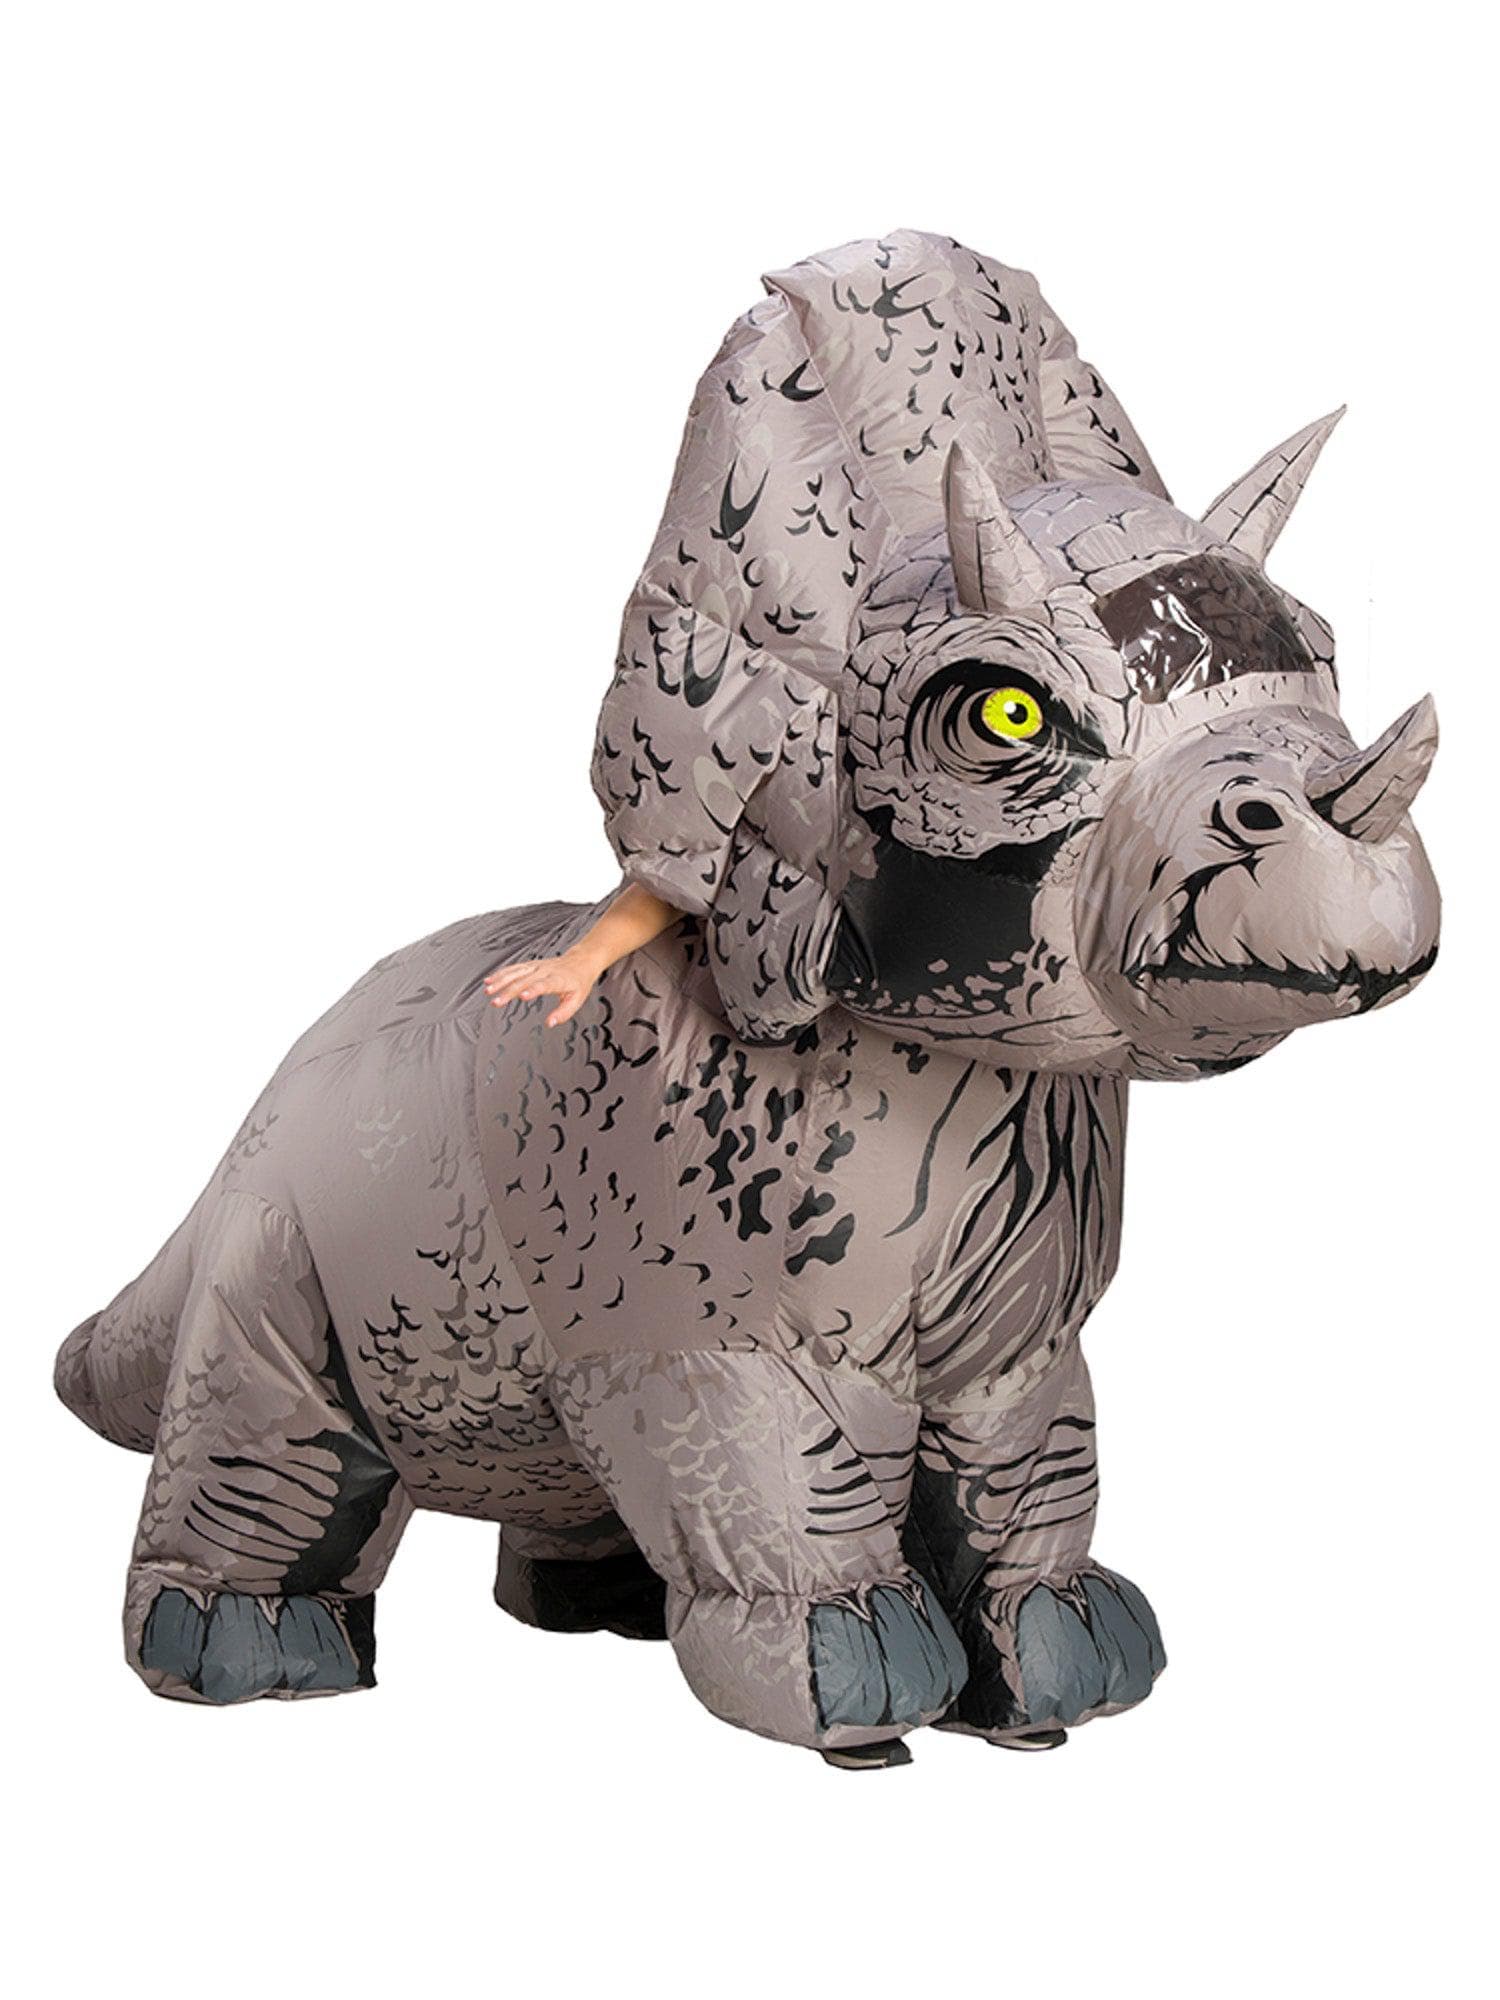 Adult Inflatable Triceratops Costume - costumes.com